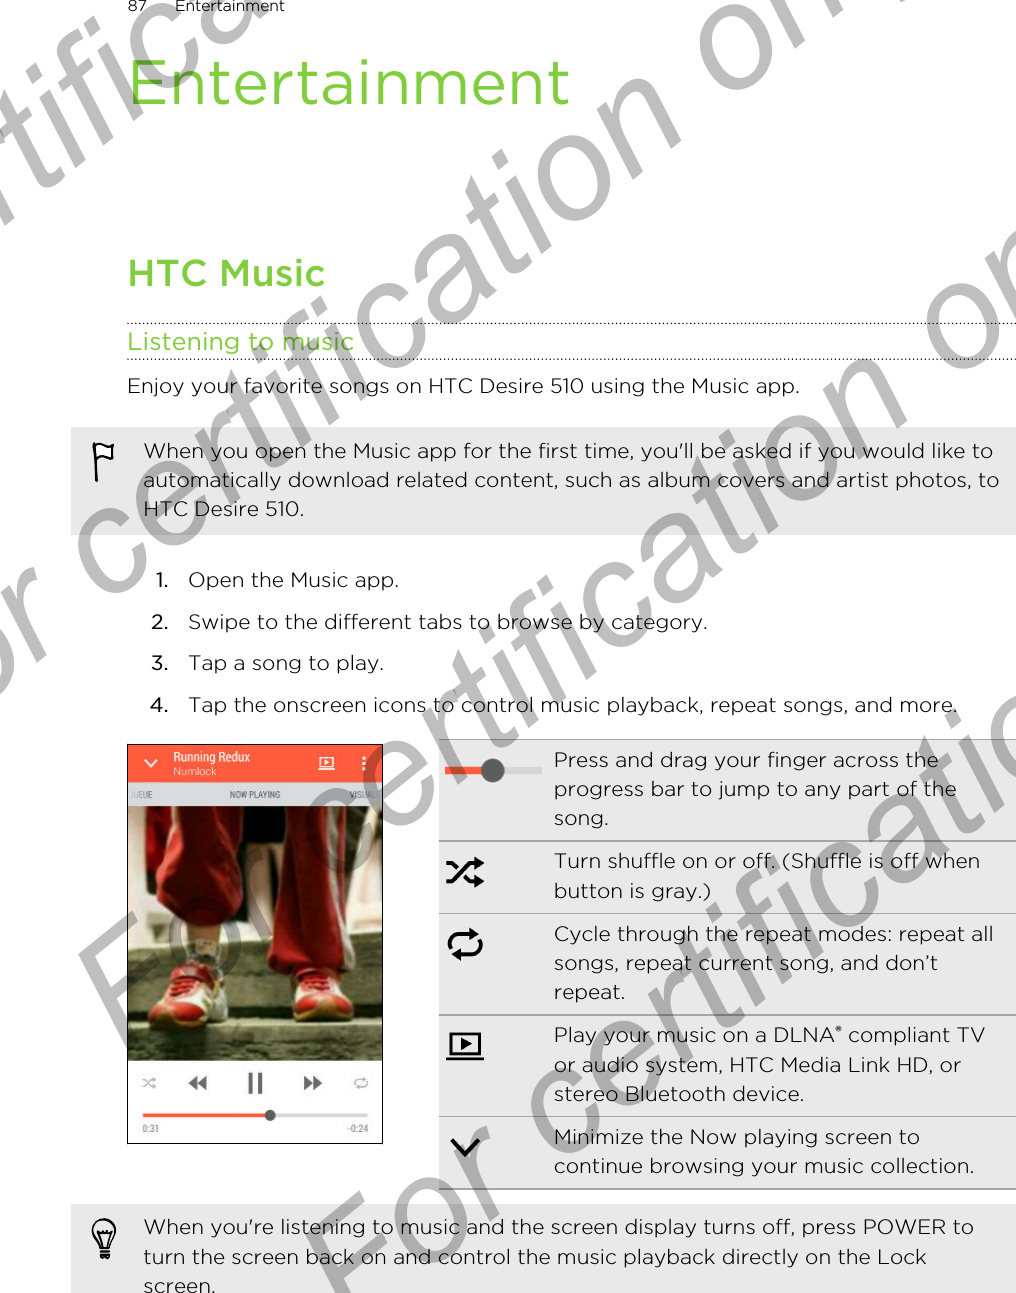 EntertainmentHTC MusicListening to musicEnjoy your favorite songs on HTC Desire 510 using the Music app.When you open the Music app for the first time, you&apos;ll be asked if you would like toautomatically download related content, such as album covers and artist photos, toHTC Desire 510.1. Open the Music app.2. Swipe to the different tabs to browse by category.3. Tap a song to play.4. Tap the onscreen icons to control music playback, repeat songs, and more.Press and drag your finger across theprogress bar to jump to any part of thesong.Turn shuffle on or off. (Shuffle is off whenbutton is gray.)Cycle through the repeat modes: repeat allsongs, repeat current song, and don’trepeat.Play your music on a DLNA® compliant TVor audio system, HTC Media Link HD, orstereo Bluetooth device.Minimize the Now playing screen tocontinue browsing your music collection.When you&apos;re listening to music and the screen display turns off, press POWER toturn the screen back on and control the music playback directly on the Lockscreen.87 EntertainmentFor certification only  For certification only  For certification only  For certification only 